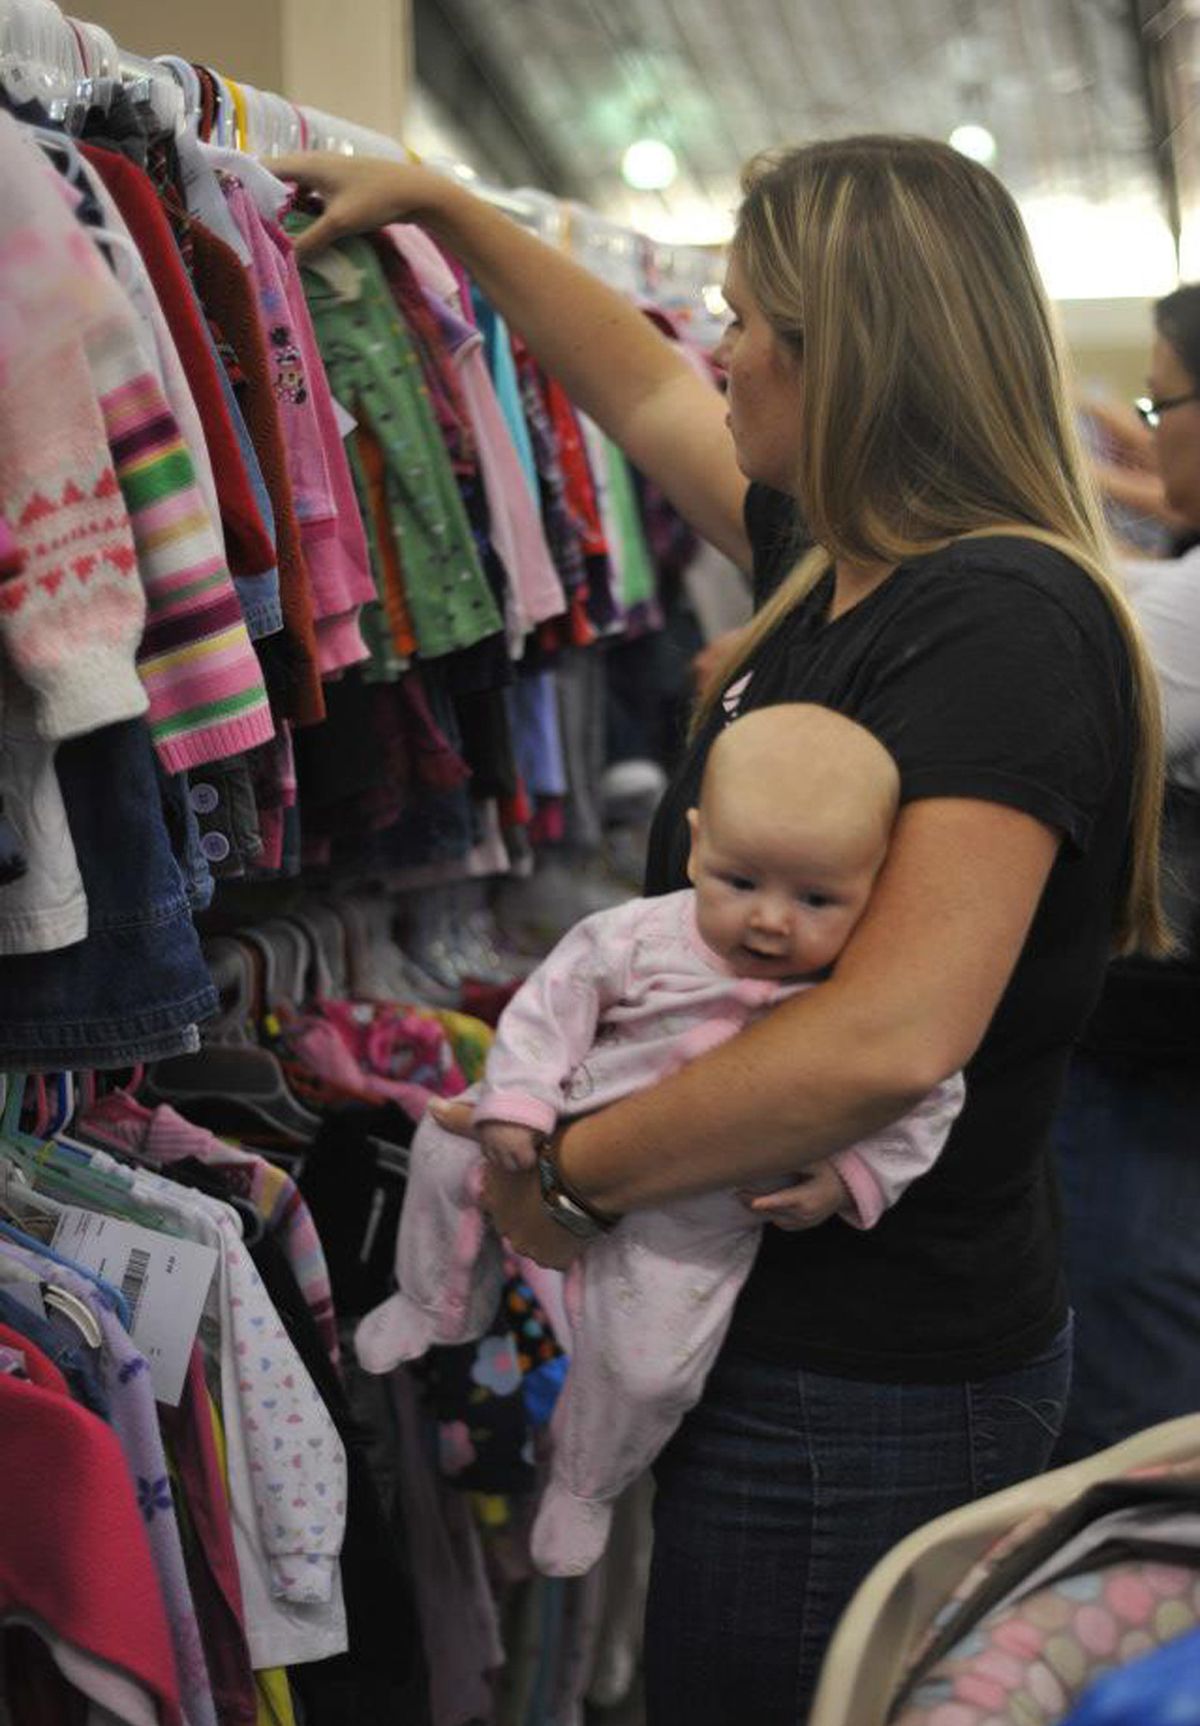 A shopper peruses baby clothing at a recent Just Between Friends consignment sale in Spokane. Thousands of shoppers are expected at this weekend’s sale at the Spokane County fairgrounds.